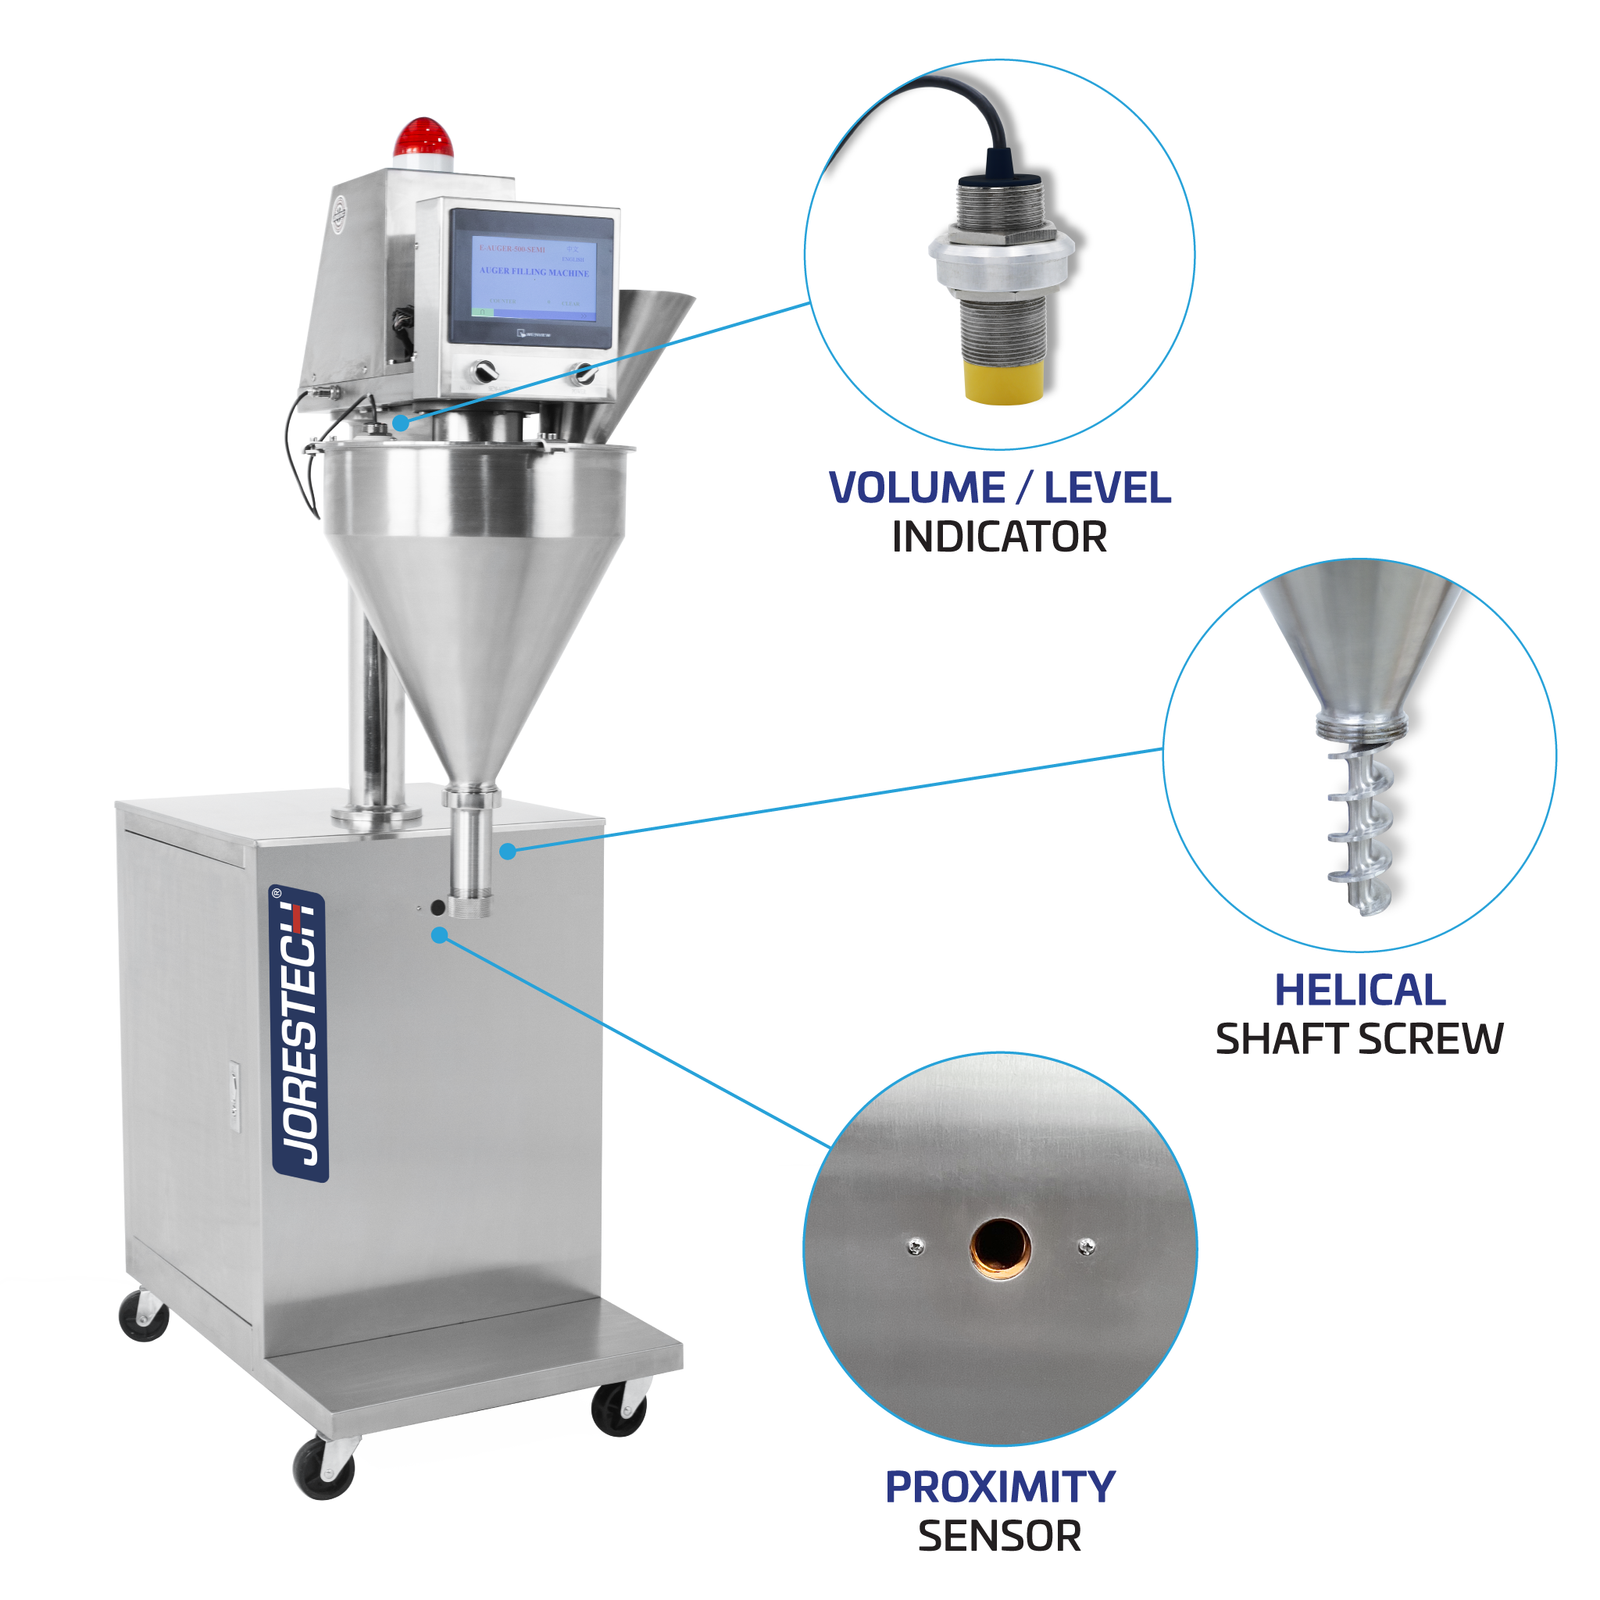 Infographic of an Auger-type stainless steel powder dispensing and filling machine. There are three highlighted features which are: “volume level indicator”, “helical shaft screw”, and “proximity sensor”.